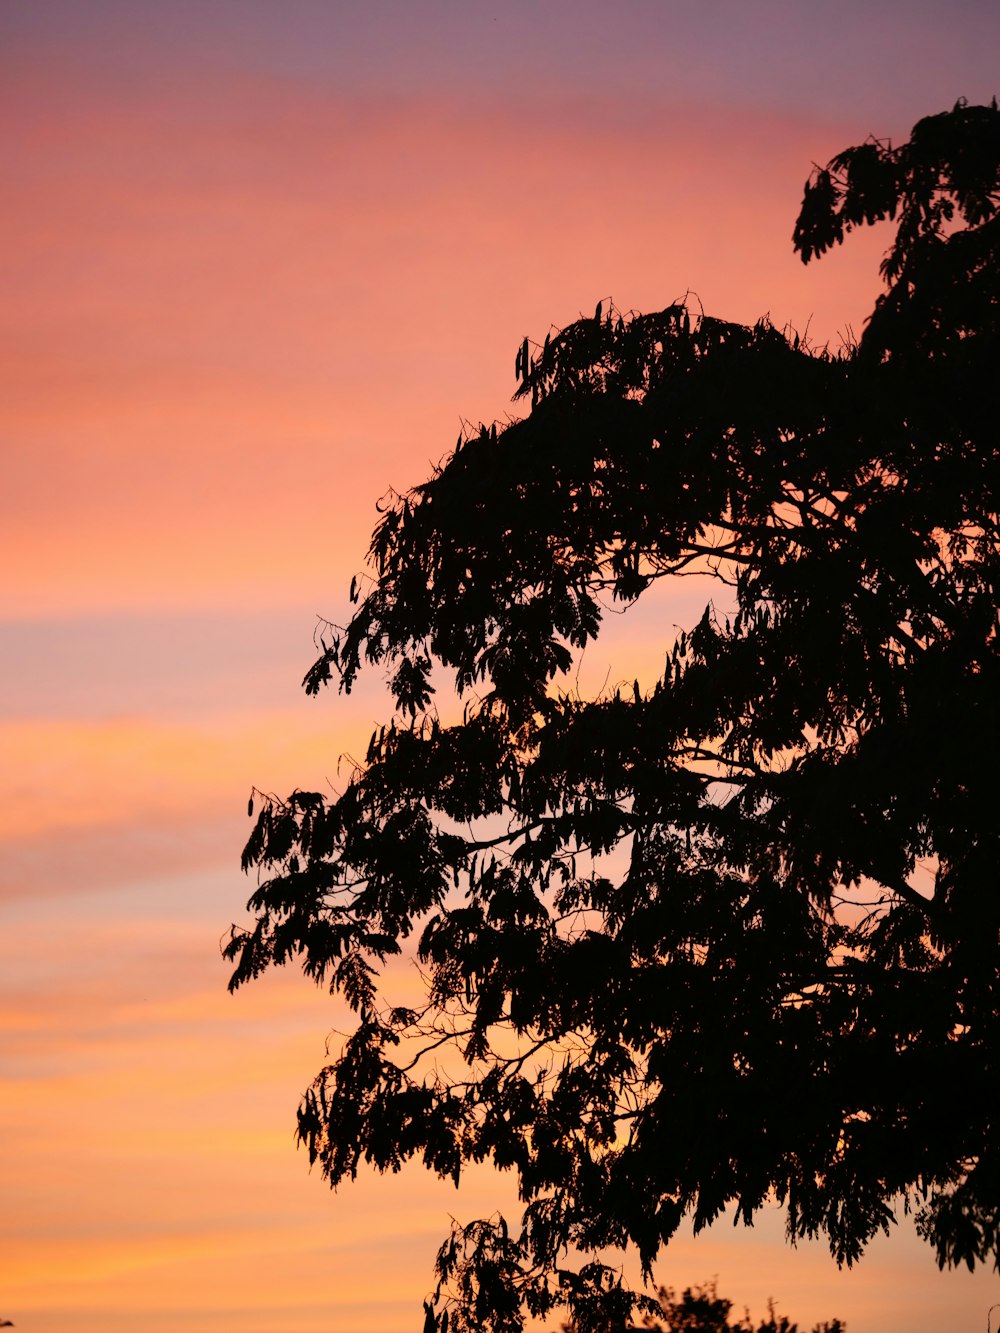 a tree is silhouetted against a sunset sky